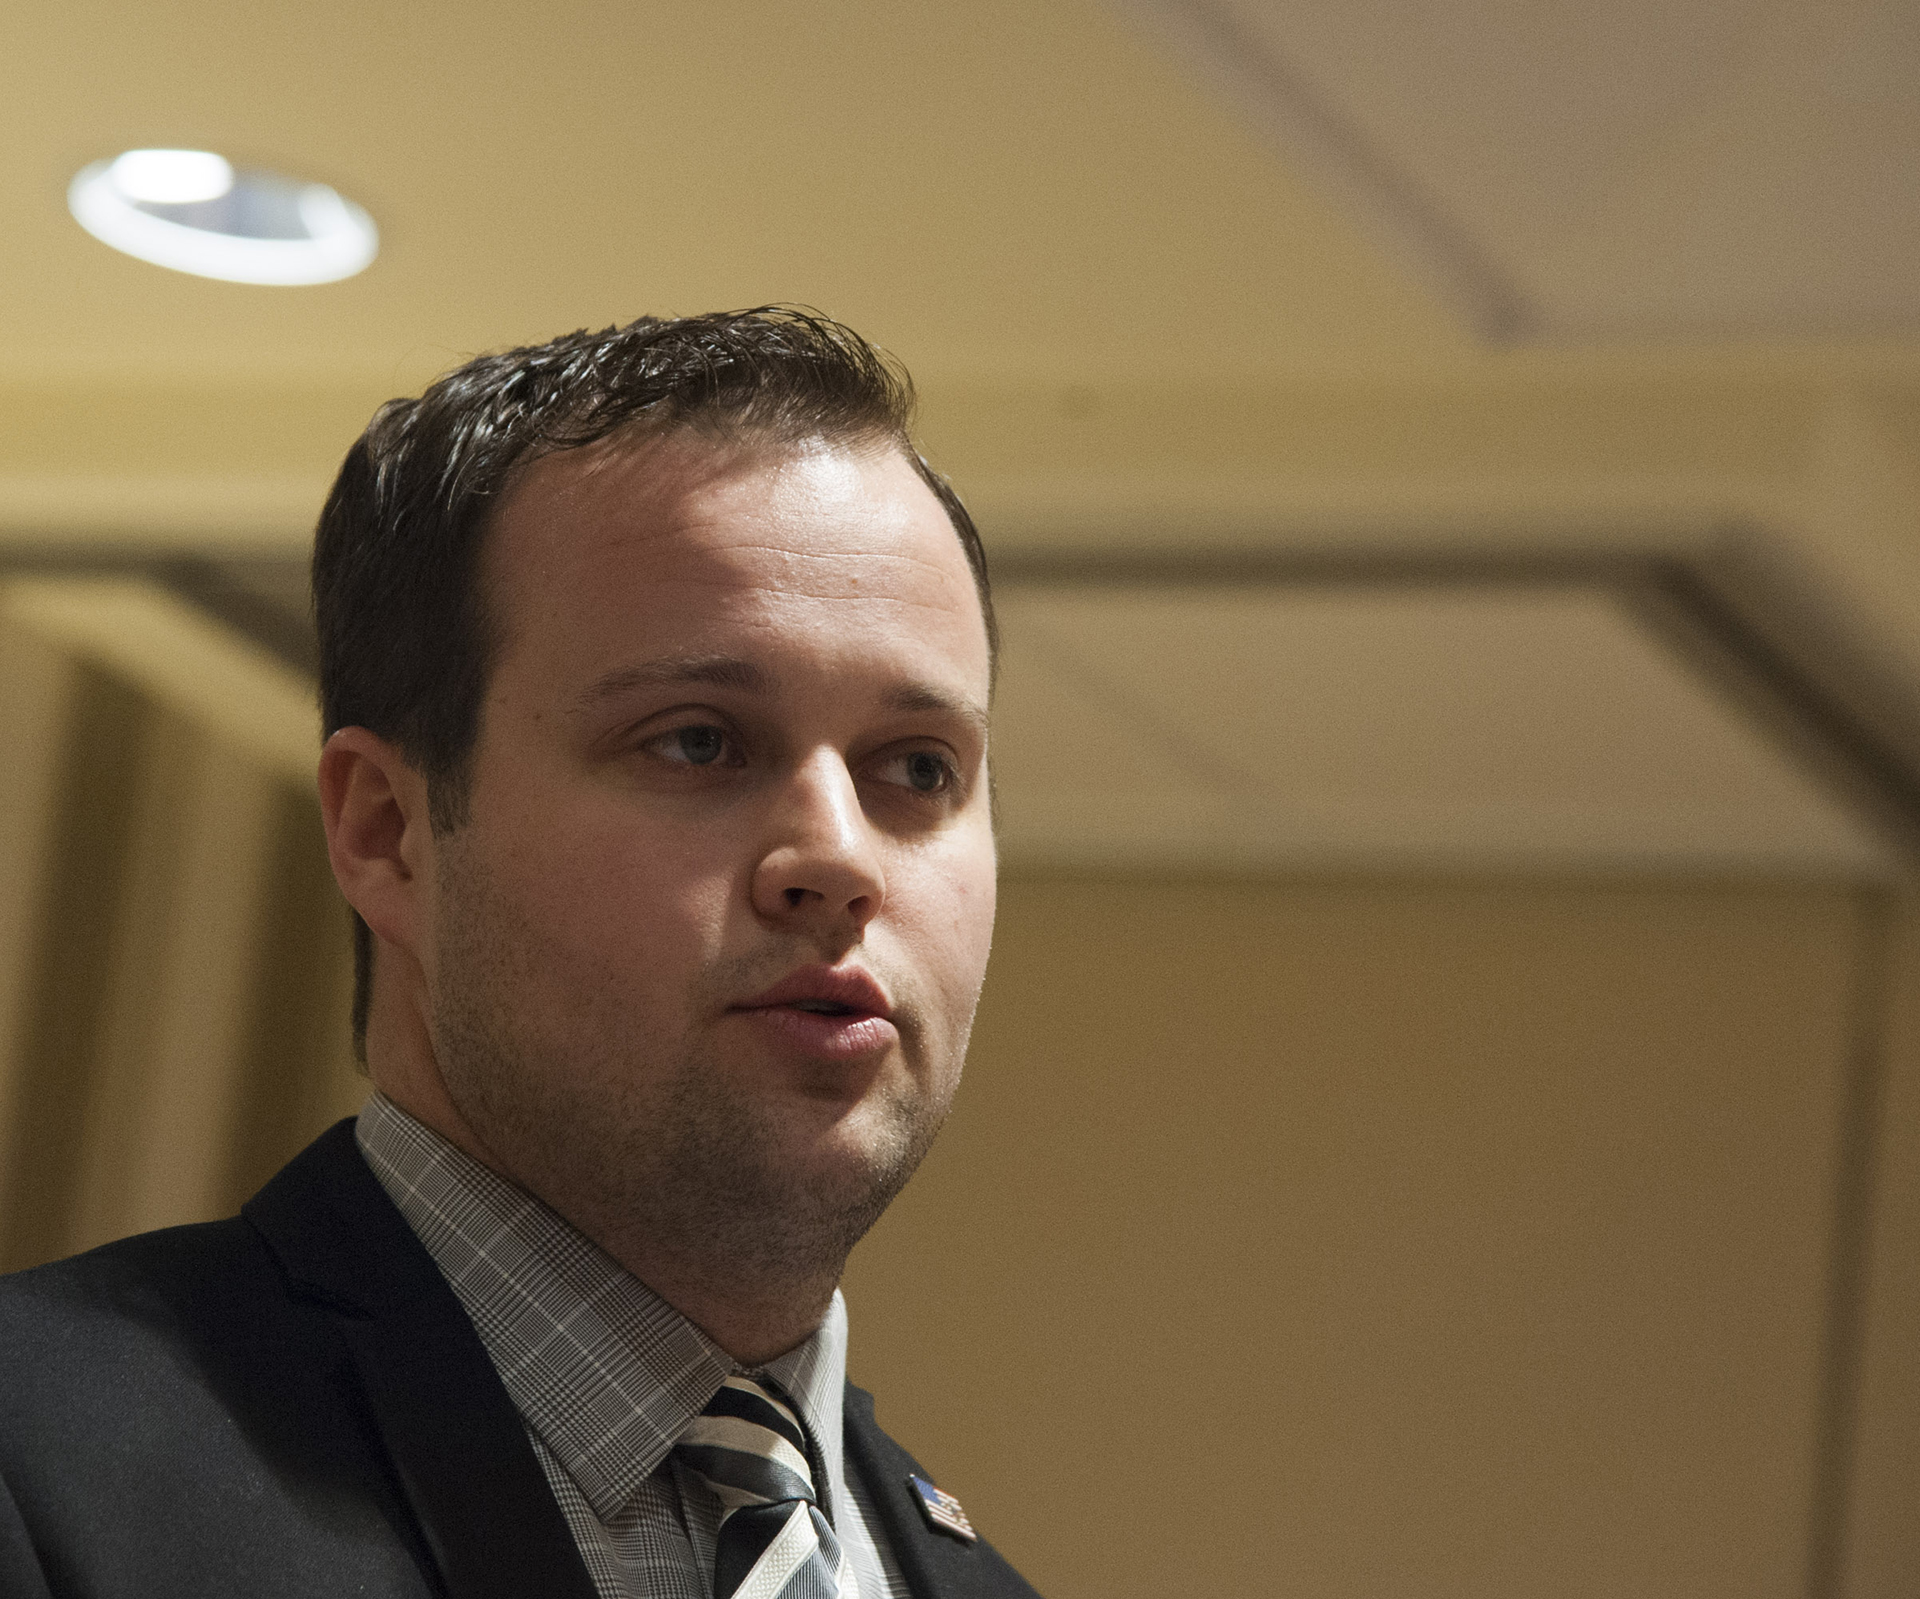 Josh Duggar allegedly paid to have affairs on Ashley Madison after molesting his sisters